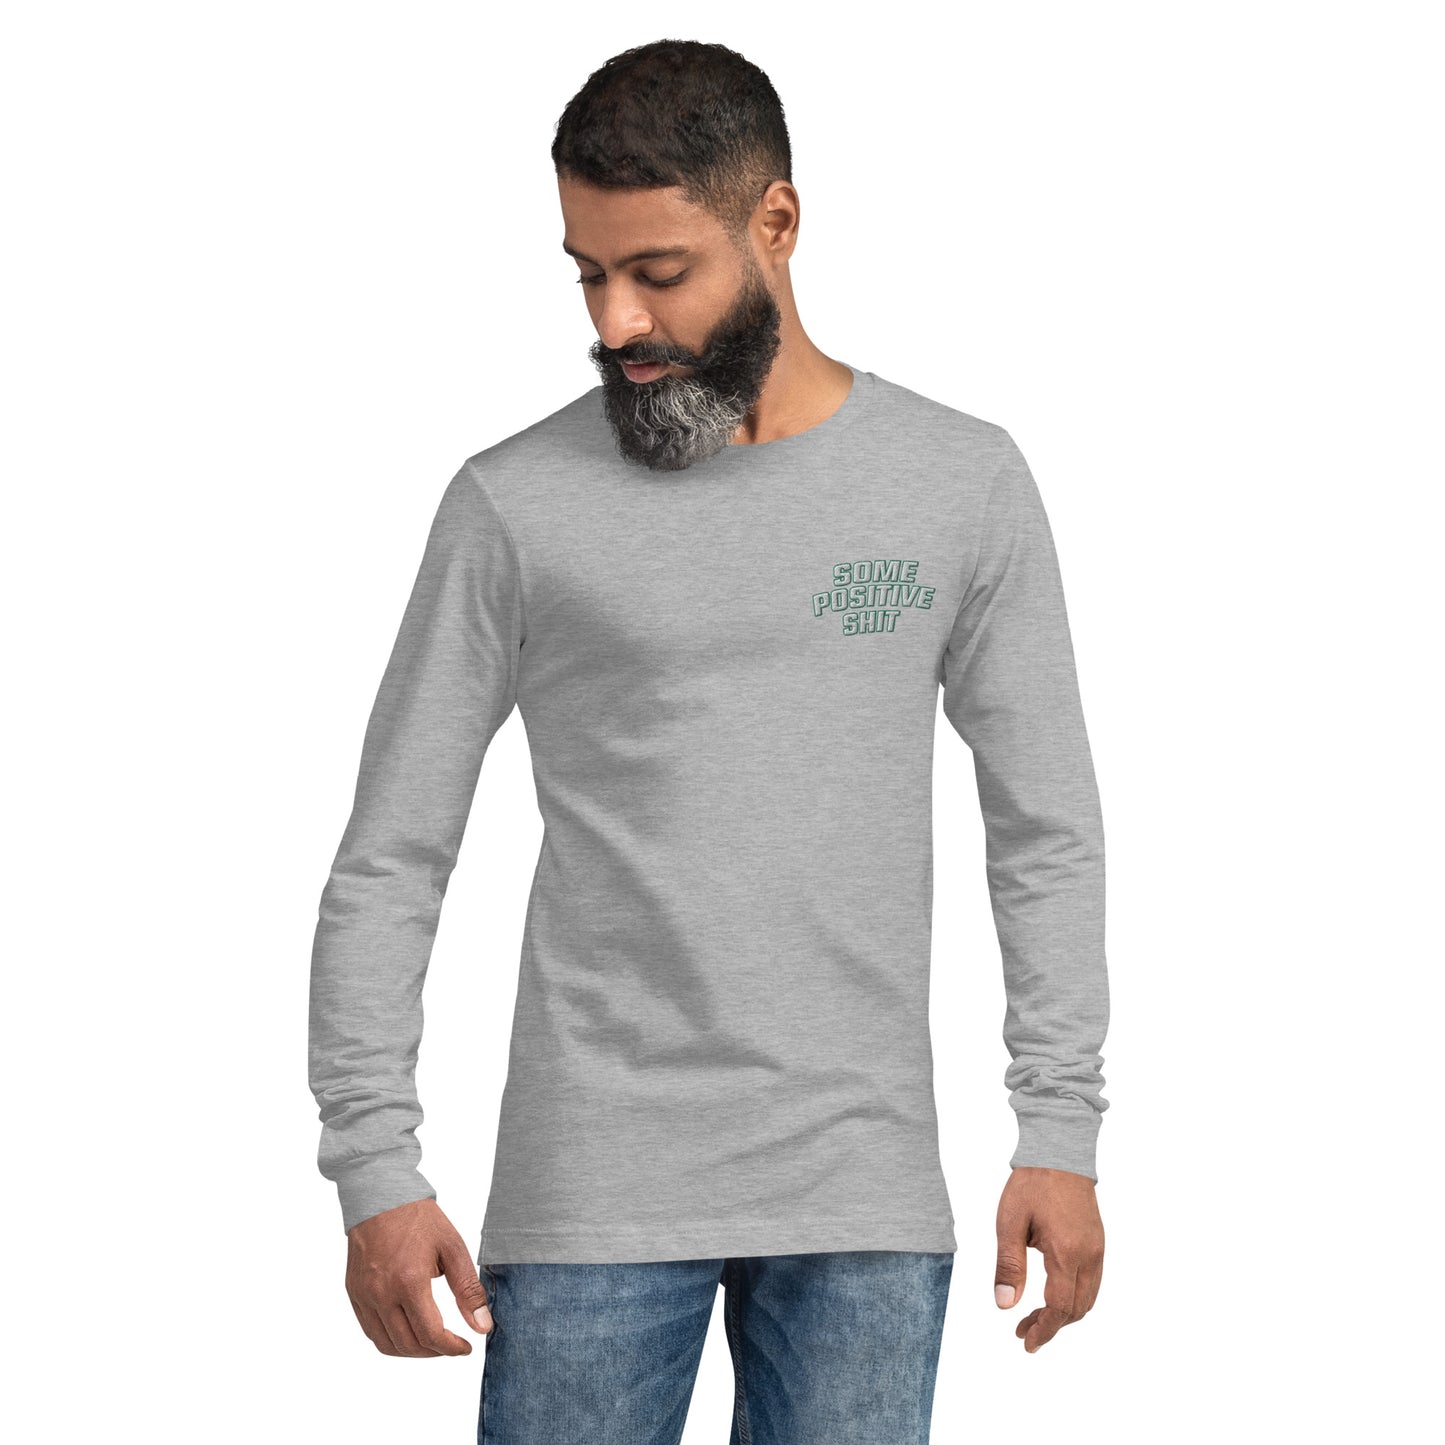 BBP Some Positive Shit Unisex Long Sleeve Tee by Forever Improving